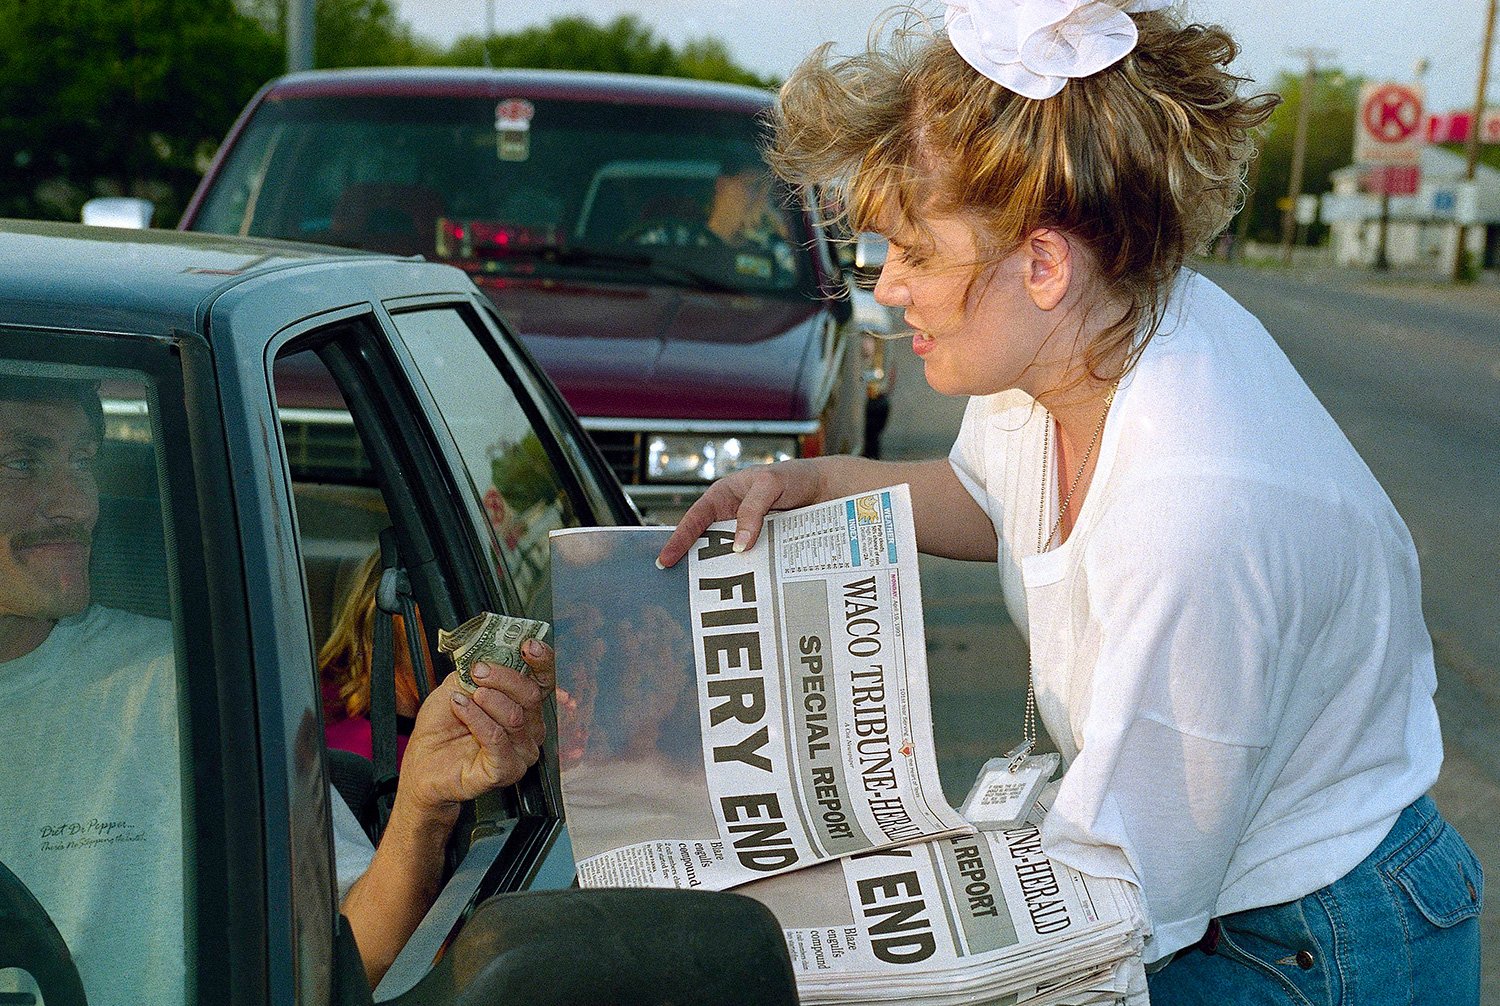  A newspaper vendor sells copies of the special edition of the Waco Tribune-Herald featuring the news of the fiery destruction of the Branch Davidian compound in Waco, Texas on April 20, 1993. (AP Photo/Susan Weems) 